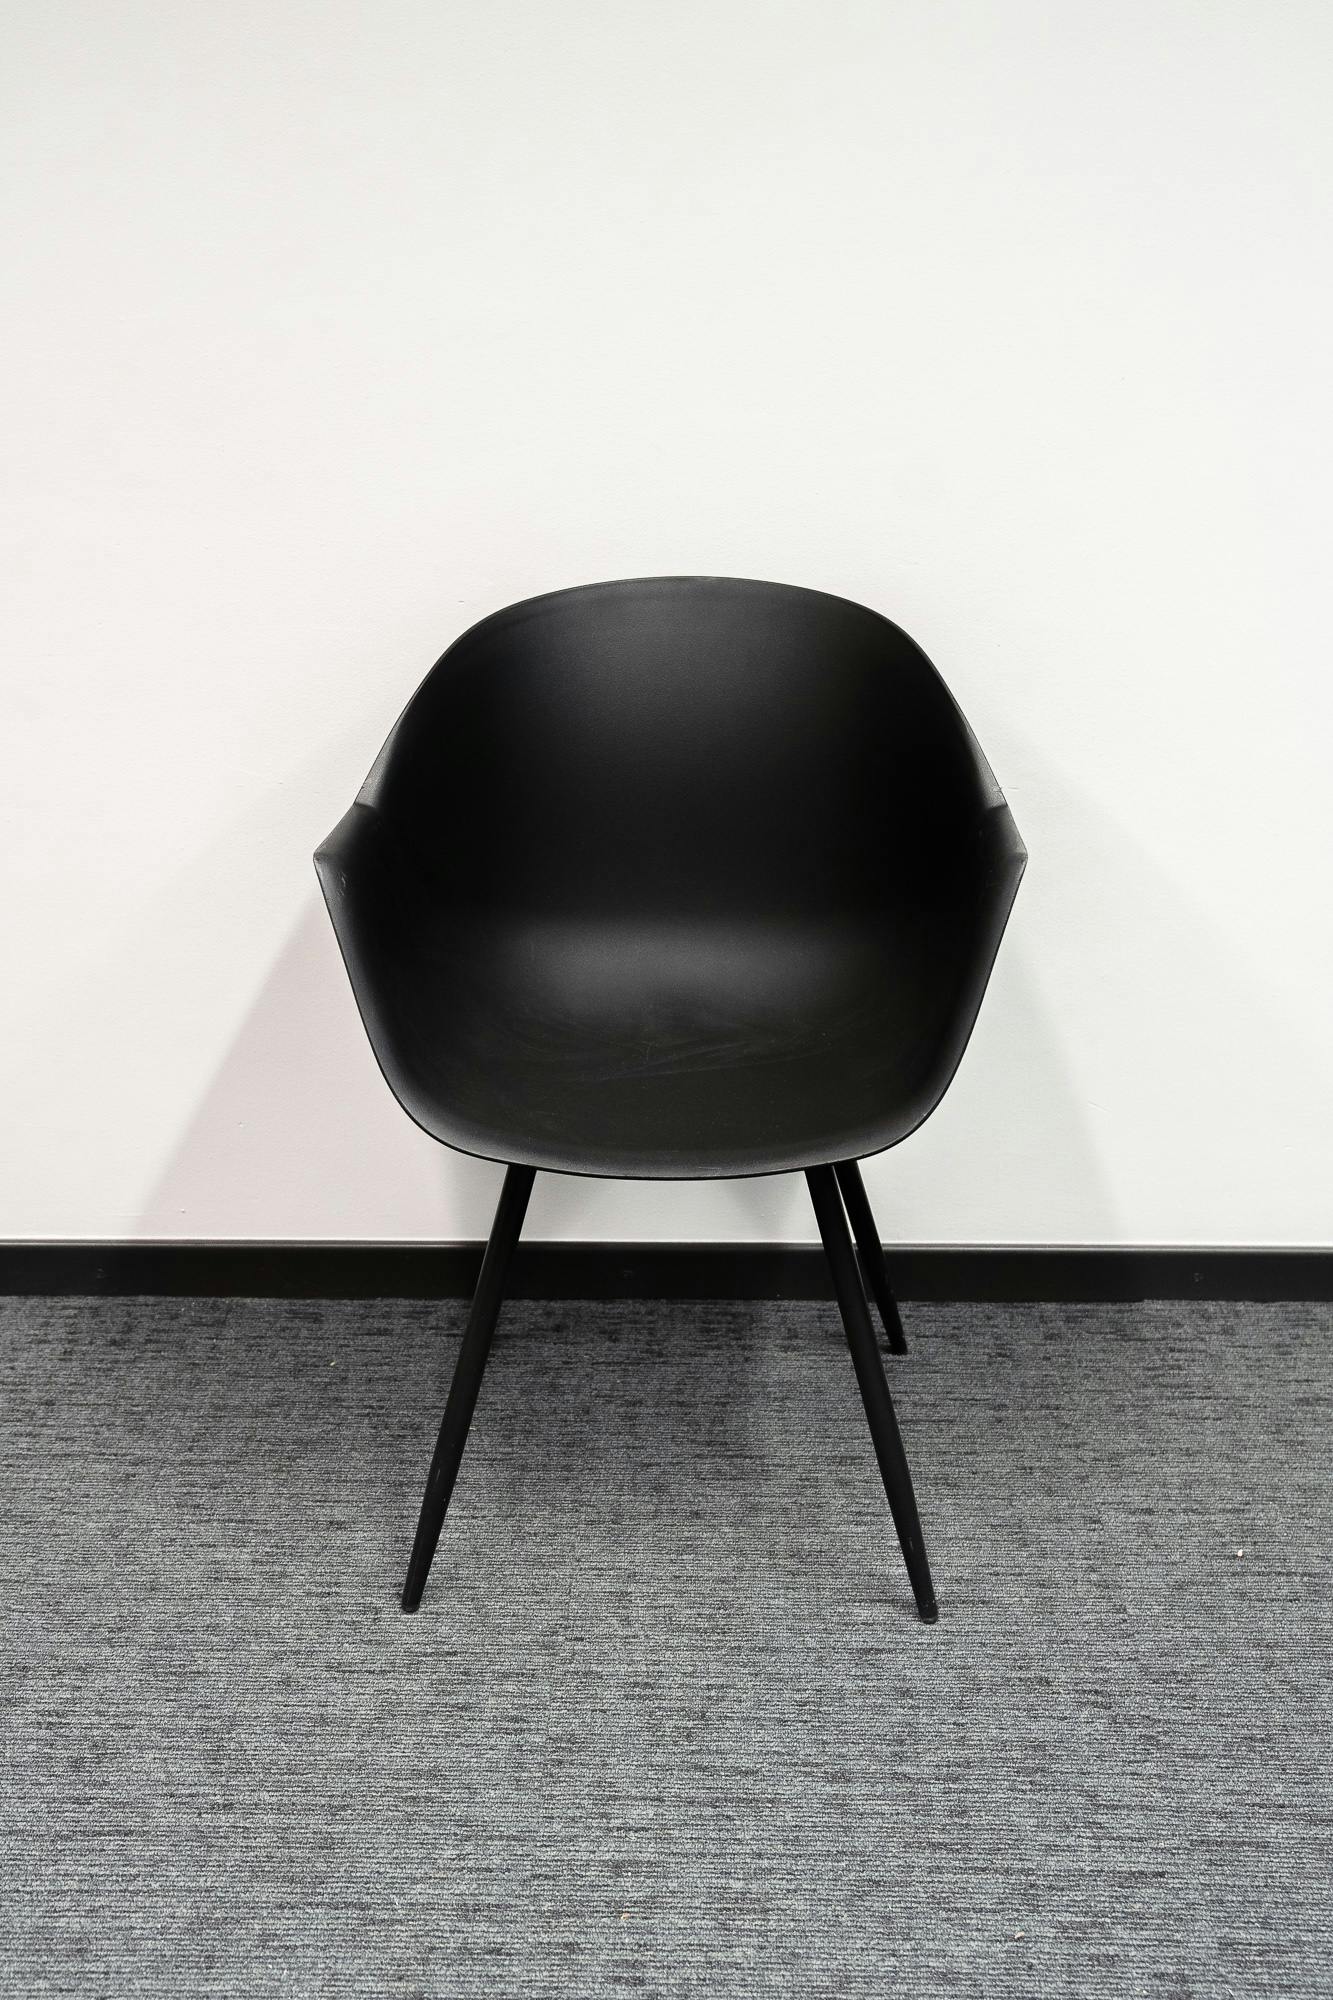 Black designer chair - Second hand quality "Chairs" - Relieve Furniture